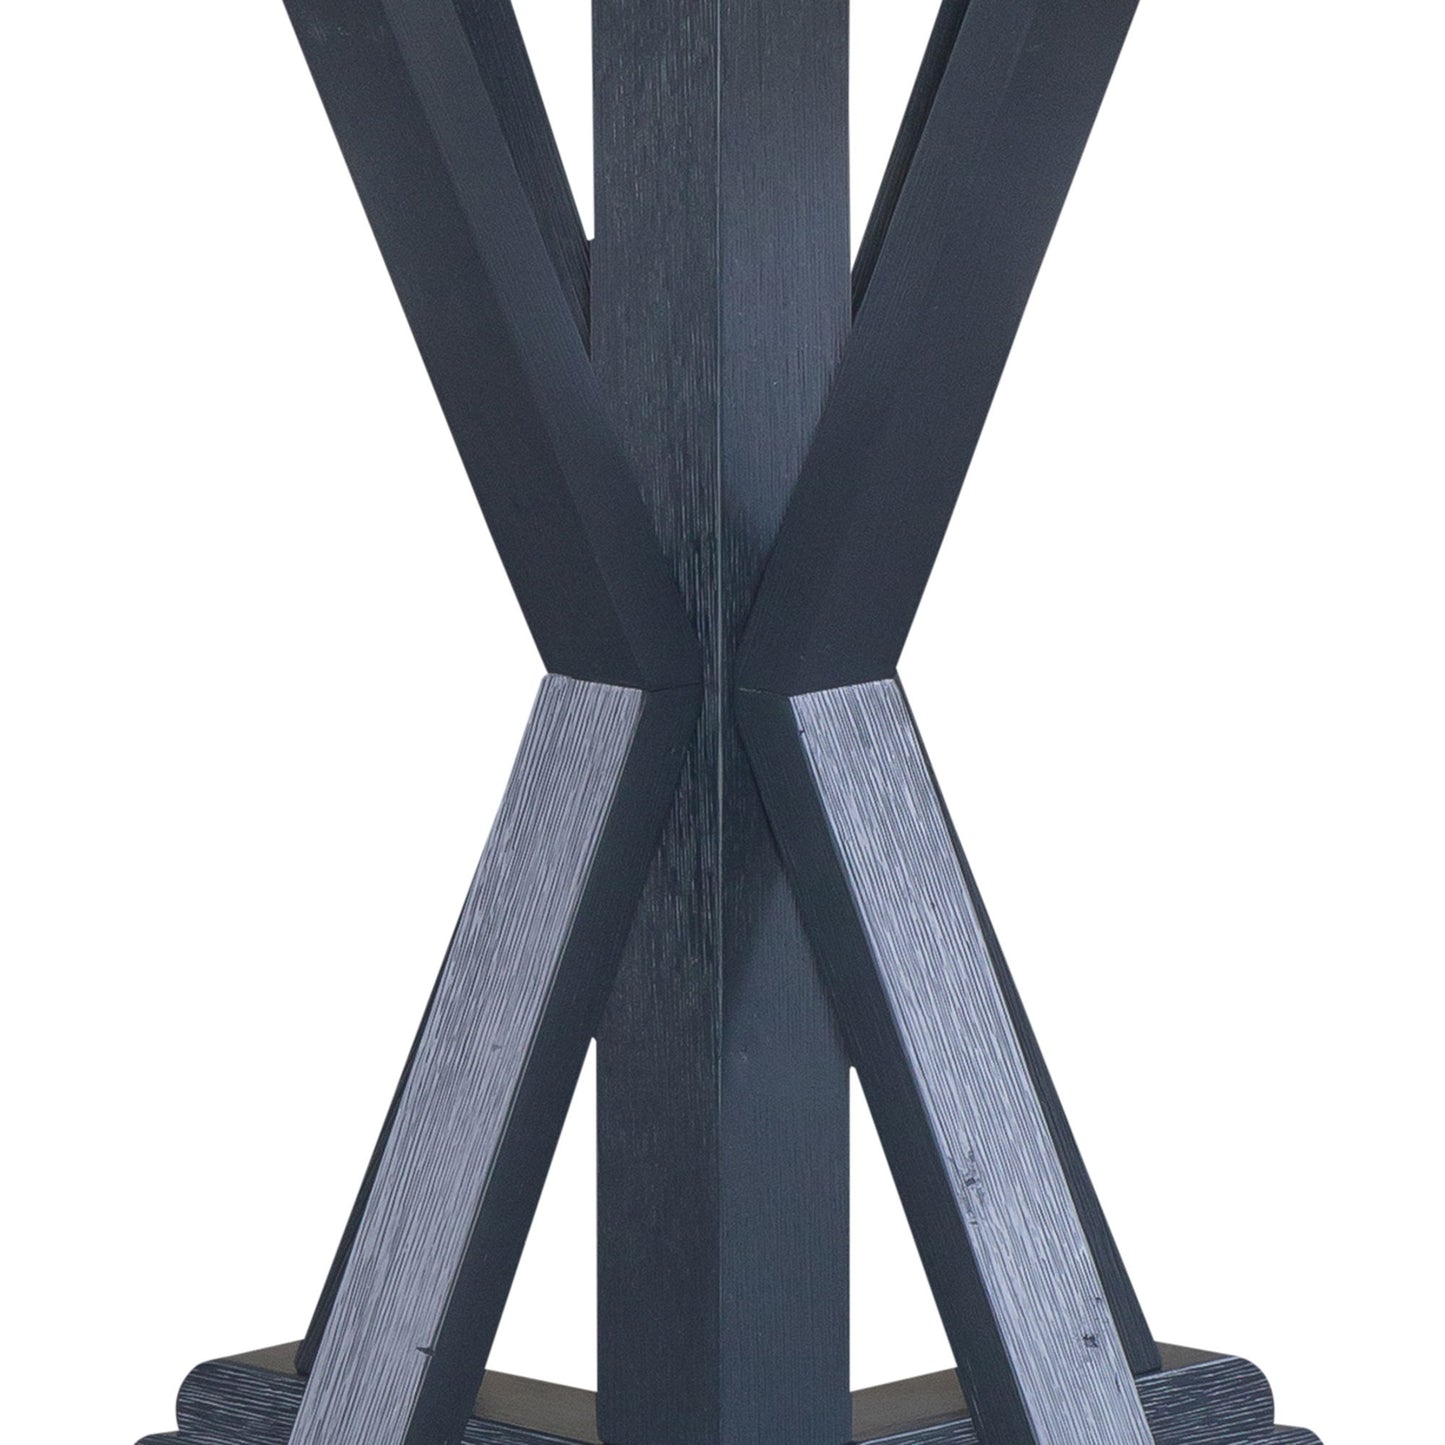 Summerville - Round End Table - Navy